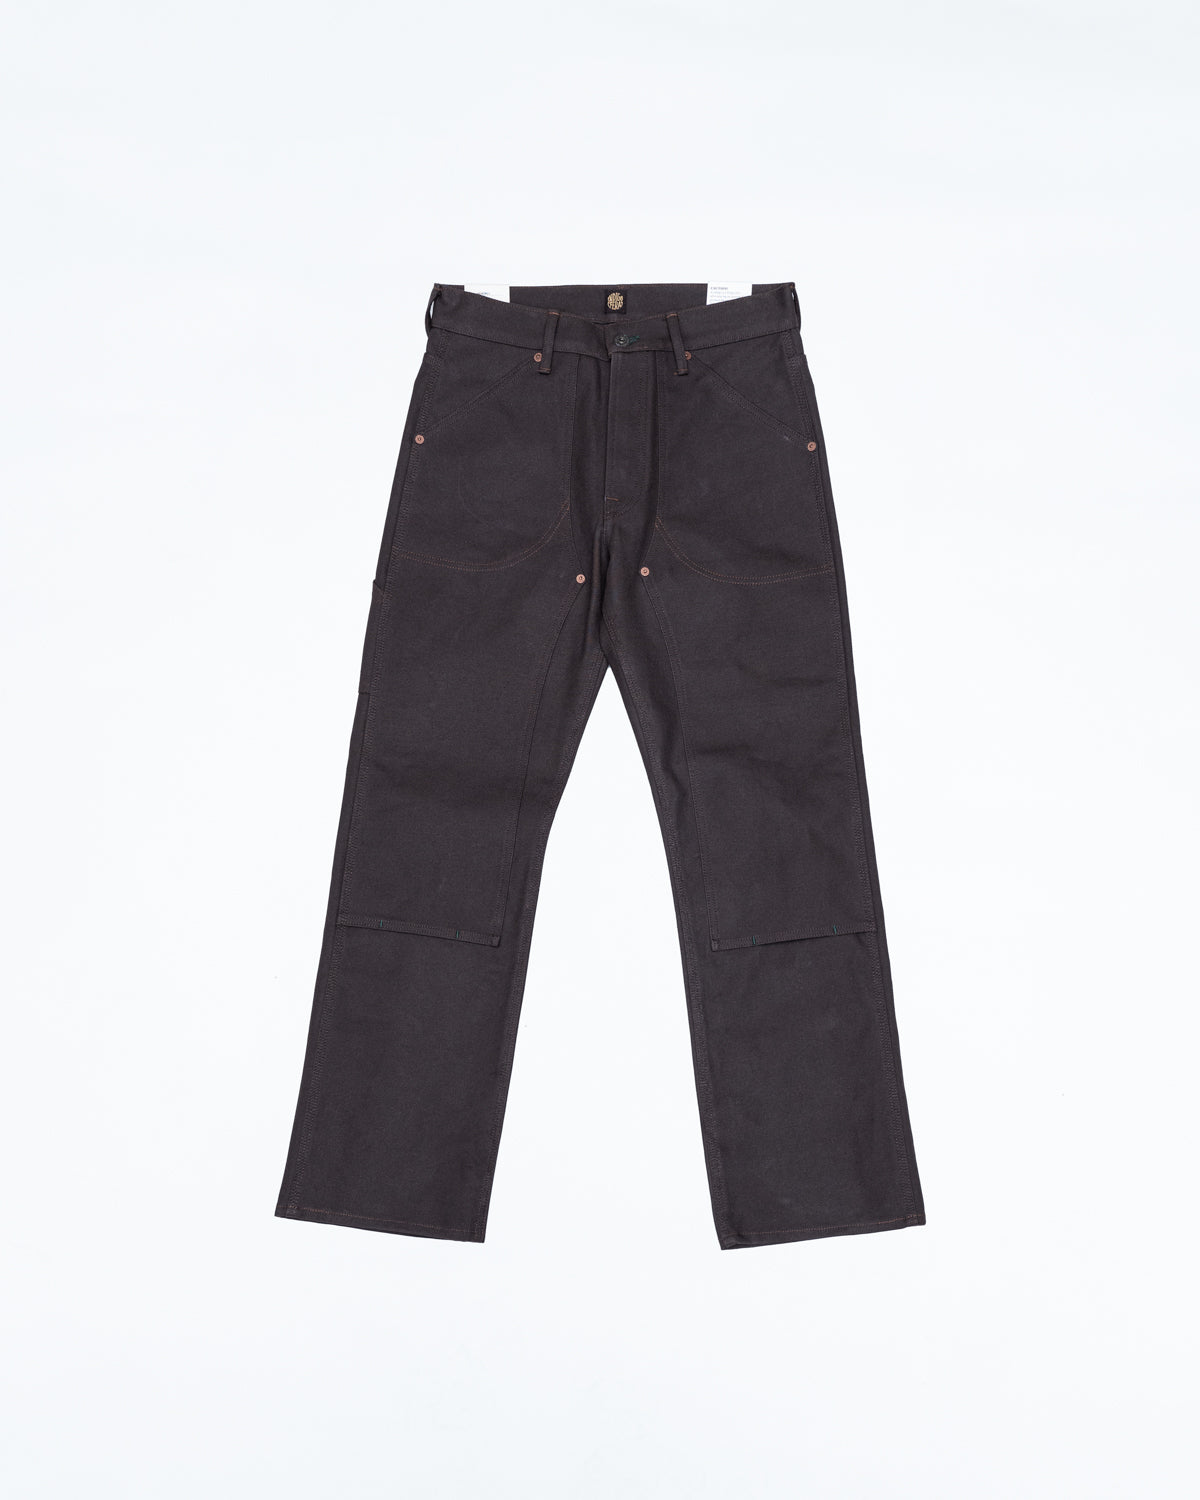 13oz - Wendell Double Knee Pant - Smithson Canvas Brown | James Dant